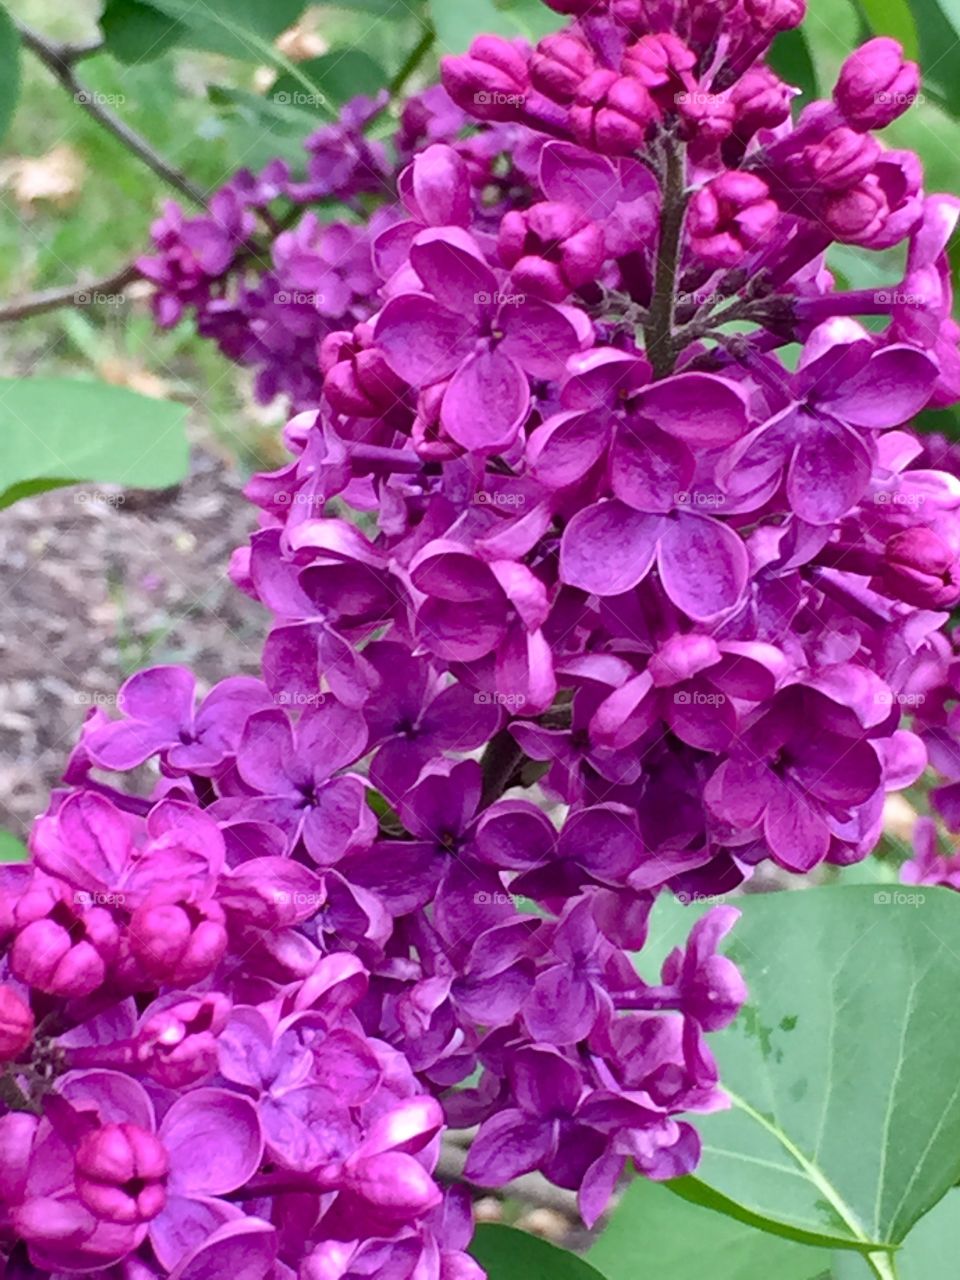 Lilacs blooming on plant